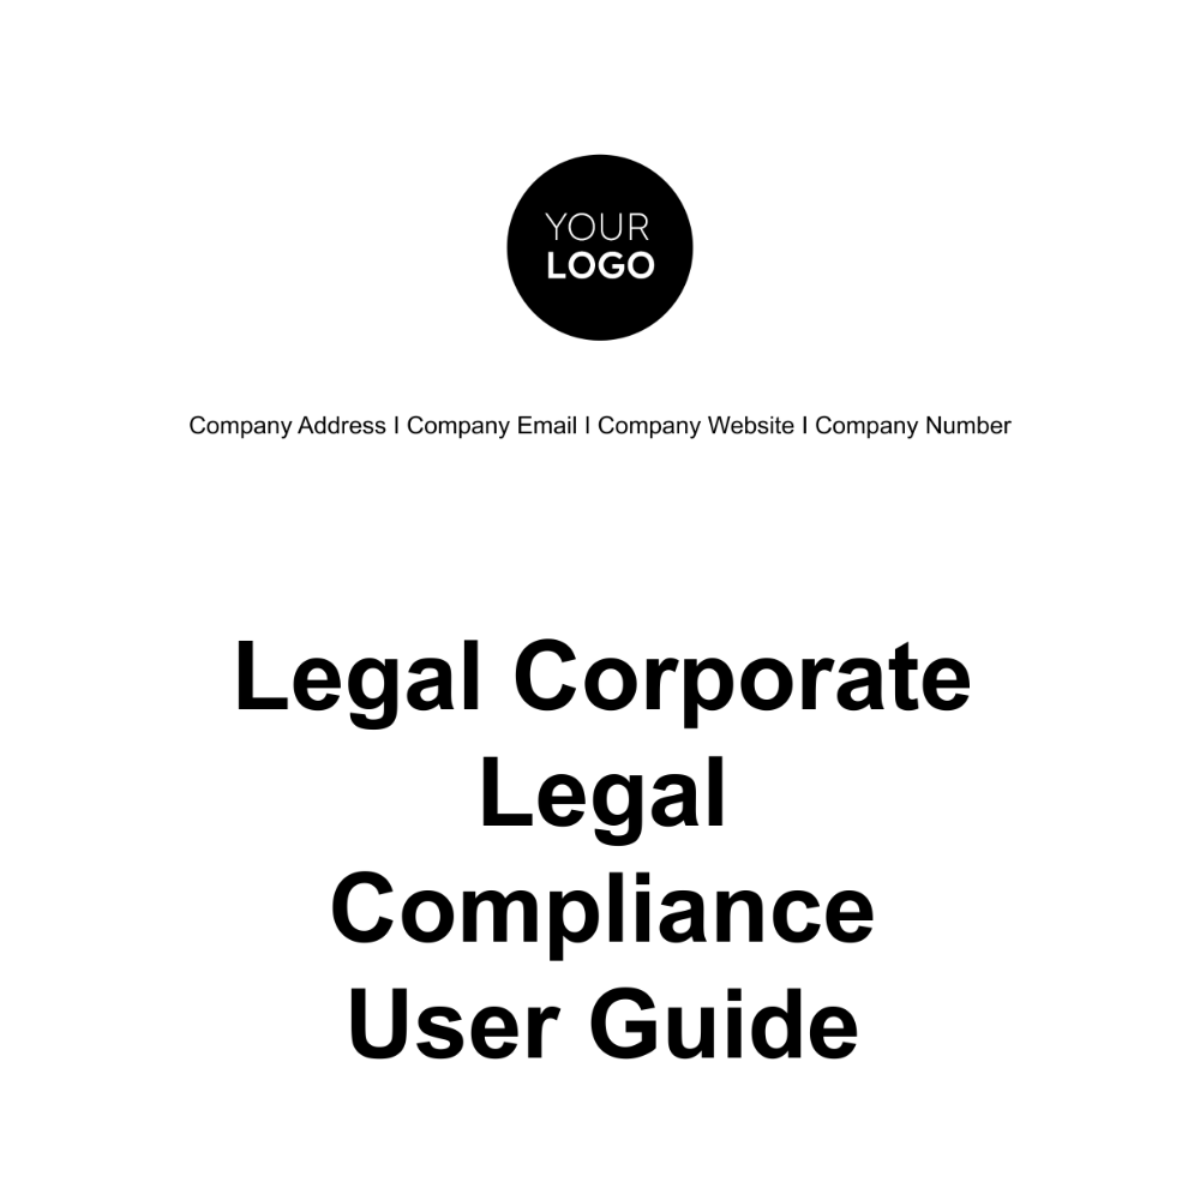 Free Legal Corporate Legal Compliance User Guide Template